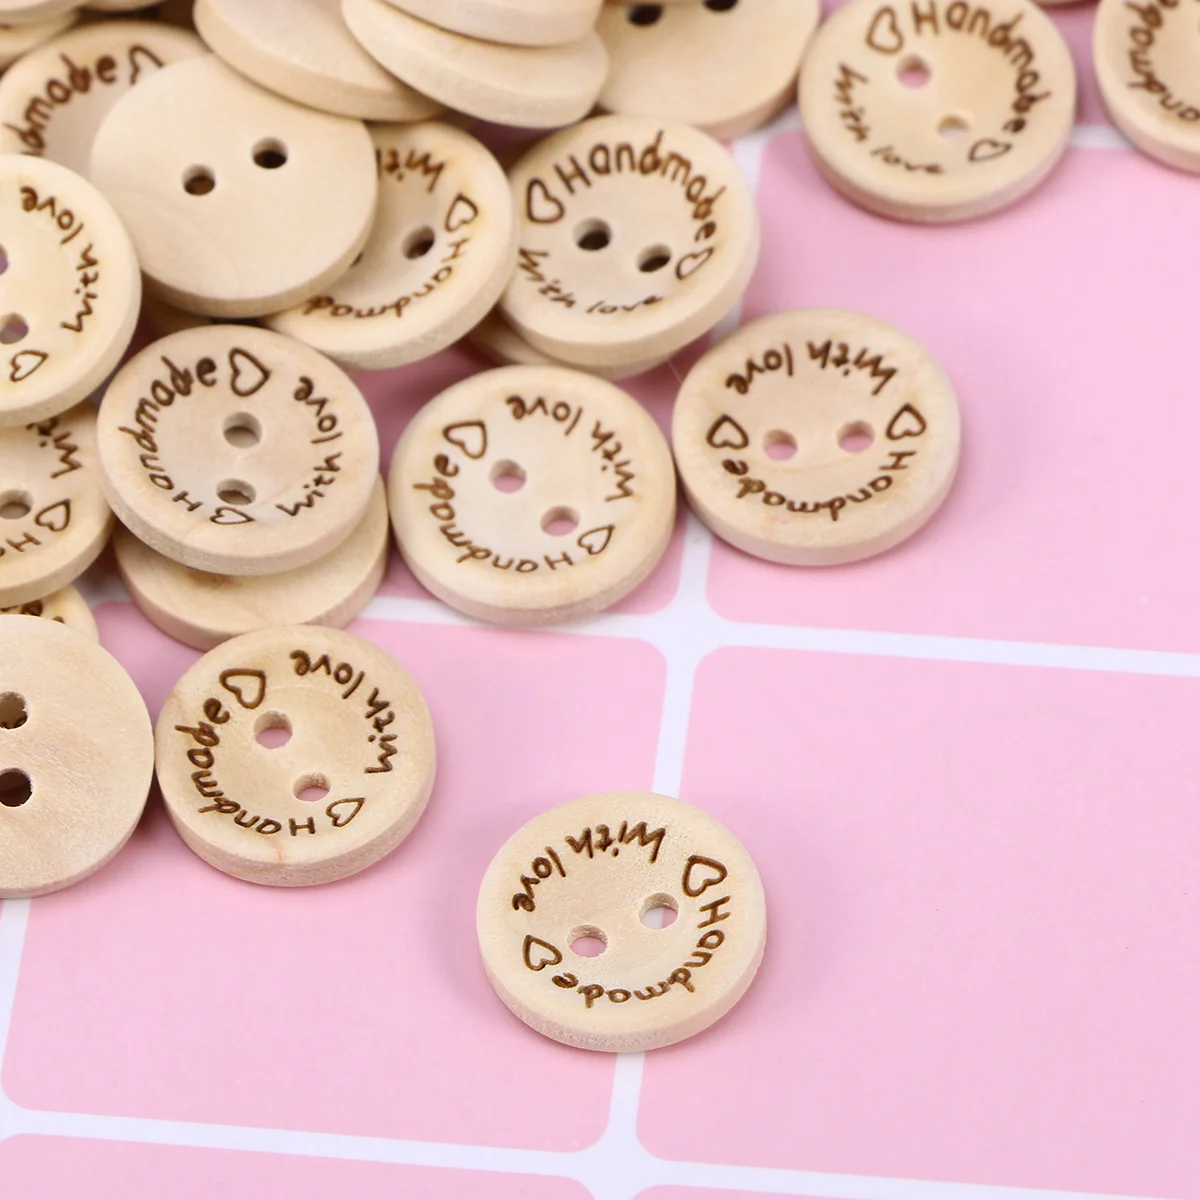 

Button Wood Wooden Handmade Craft Sewing Buttons Holes Love Round Decor Natural Decorative Vintage Shirt Rustic Scrapbook Suit